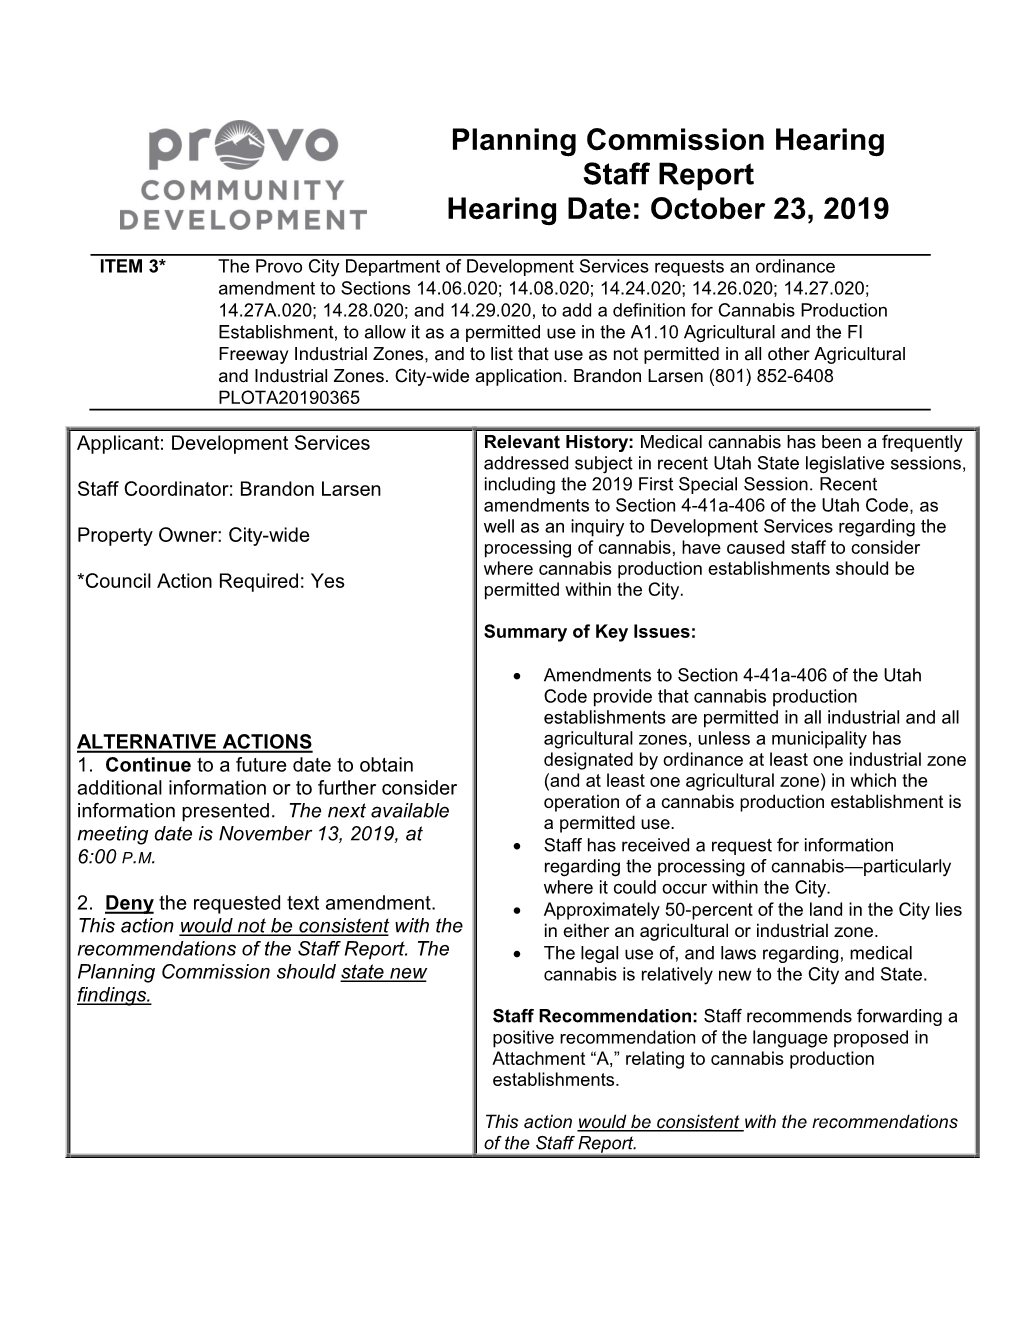 Planning Commission Hearing Staff Report Hearing Date: October 23, 2019